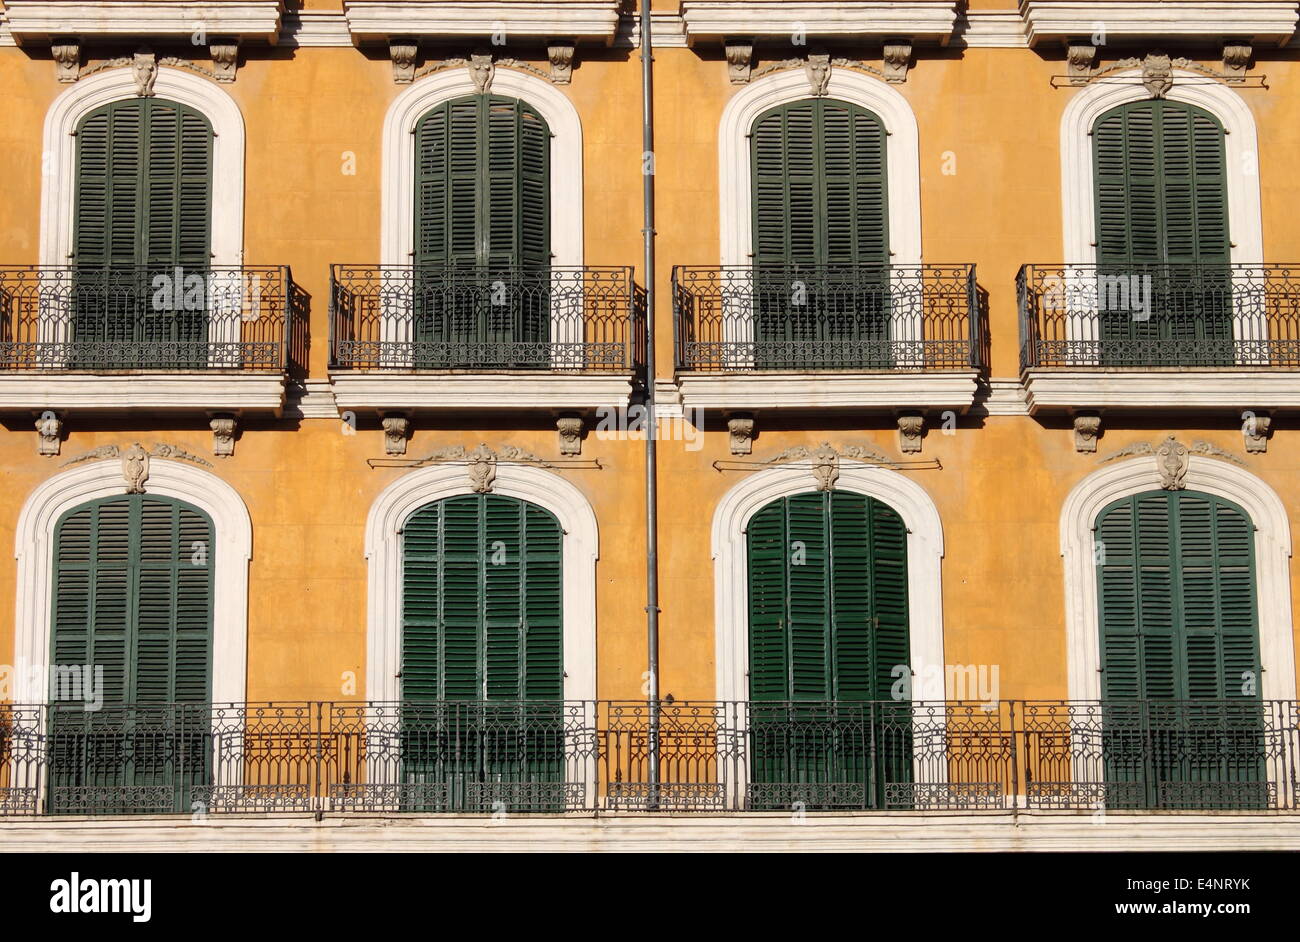 Arched windows with closed shutters and balconies Stock Photo